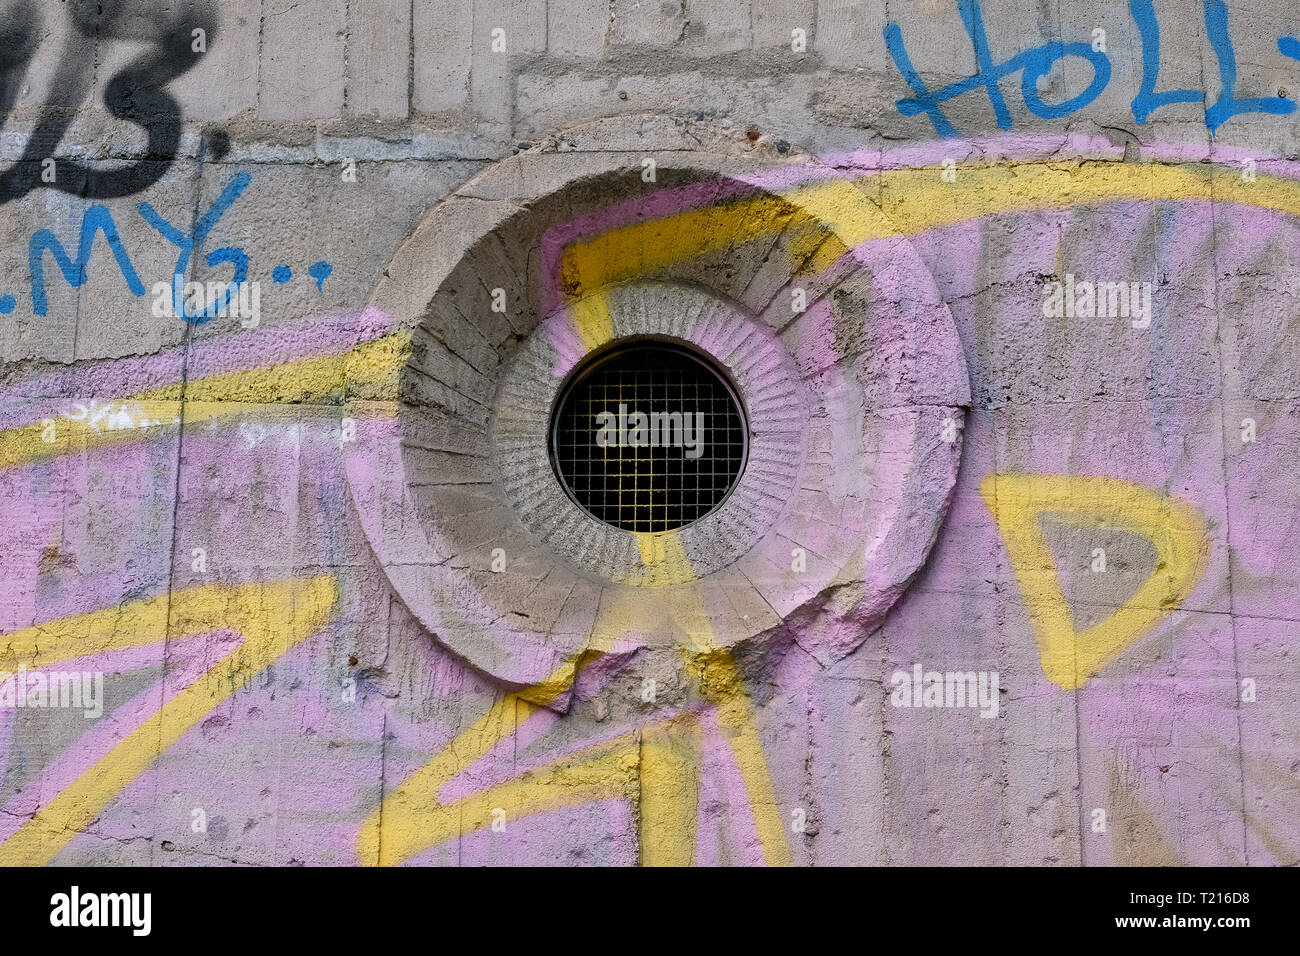 Ventilation hole of a bunker with graffiti. Stock Photo